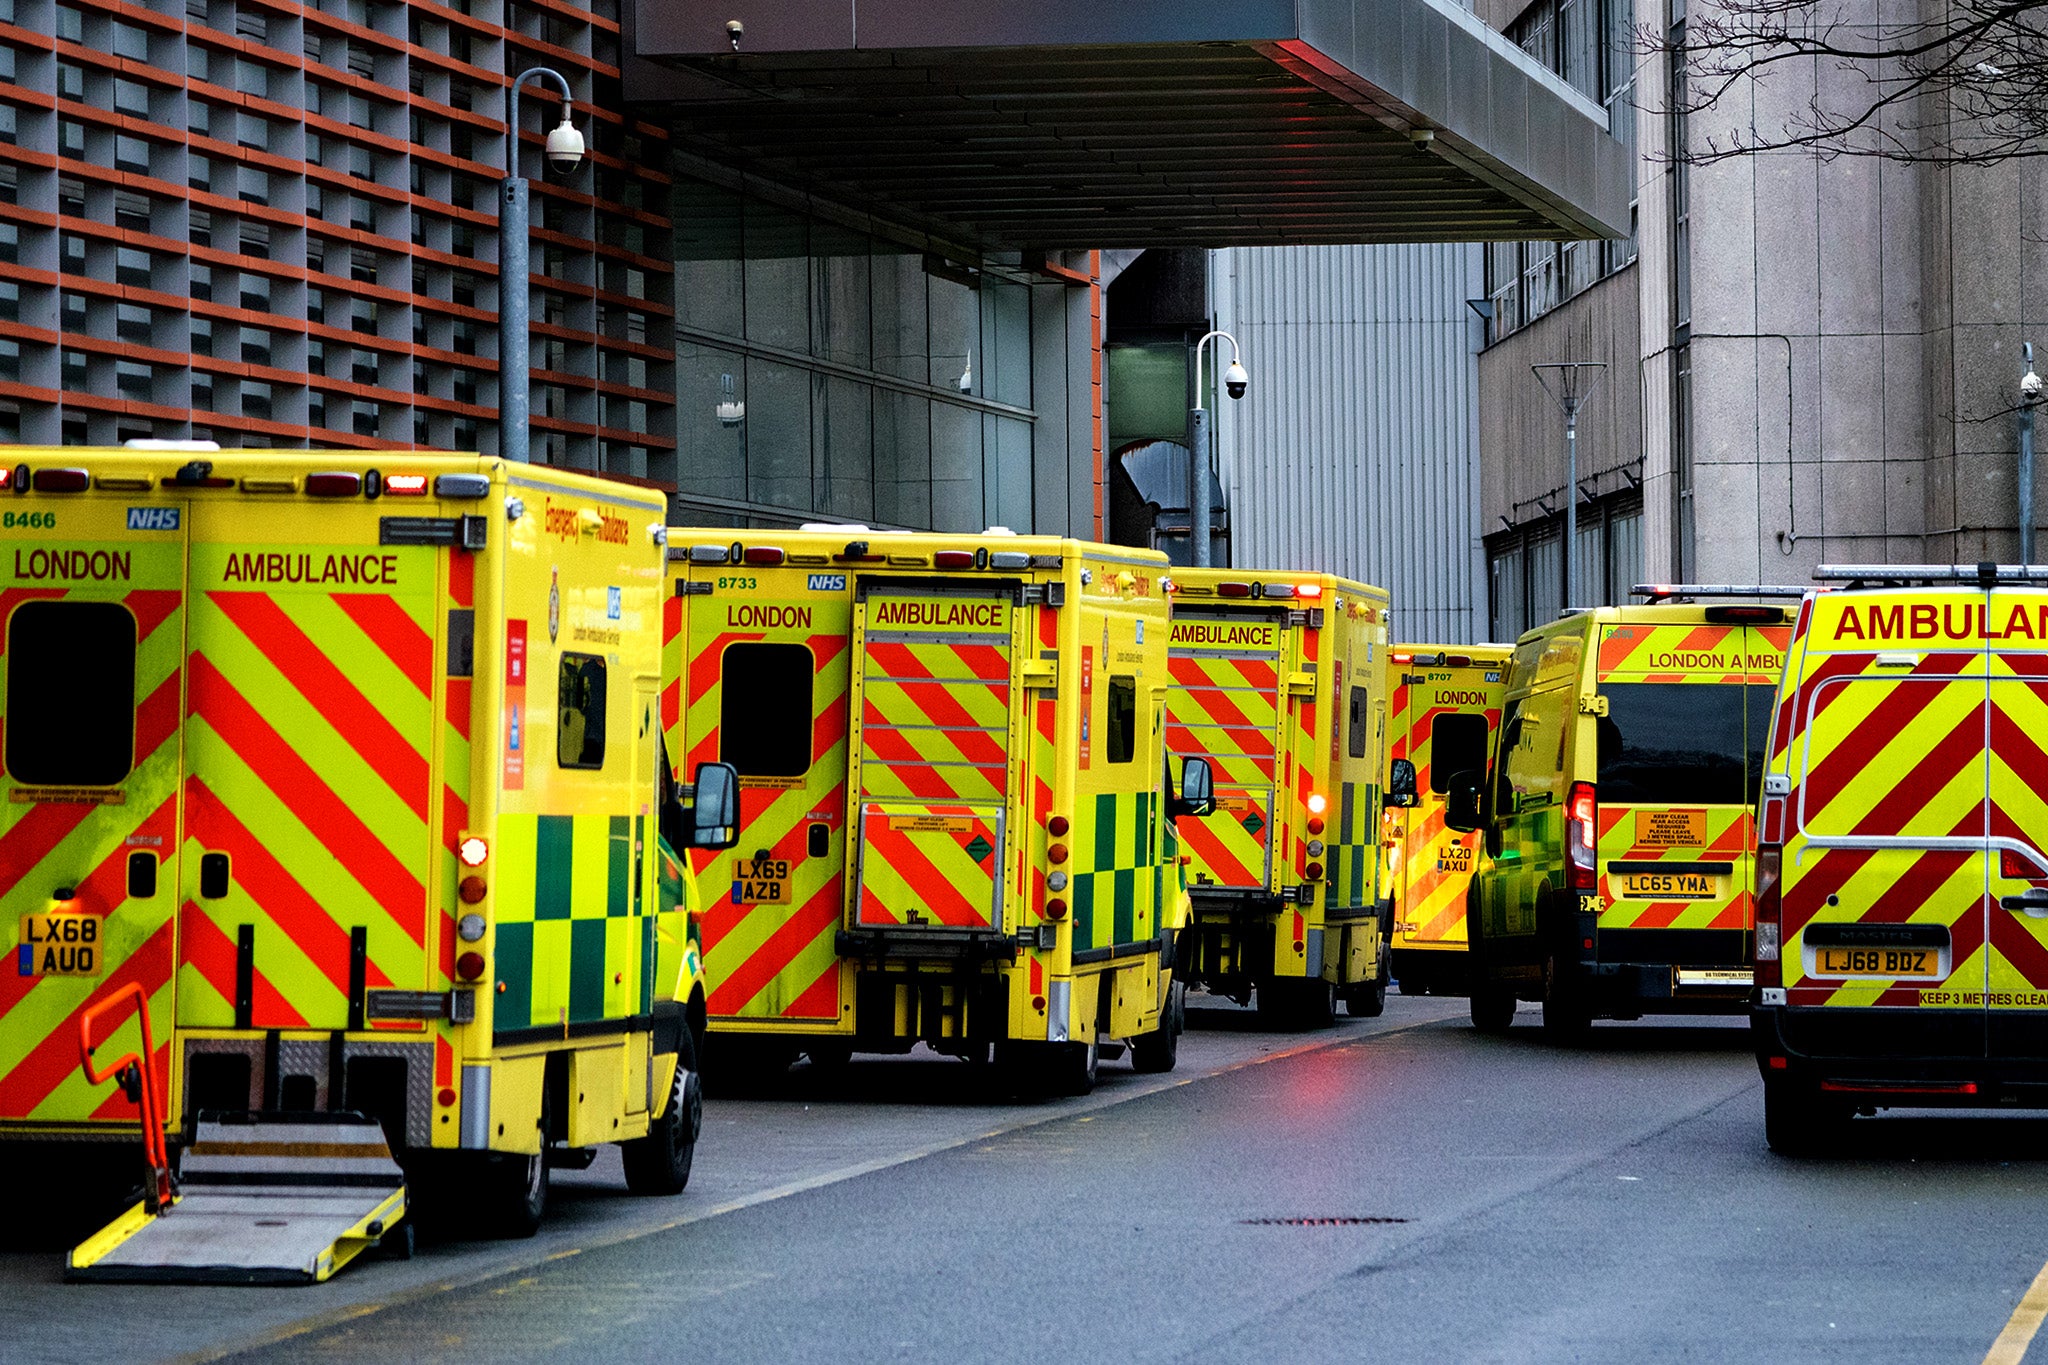 Handover delays are in turn keeping ambulances off the road, meaning they cannot get to patients who call 999